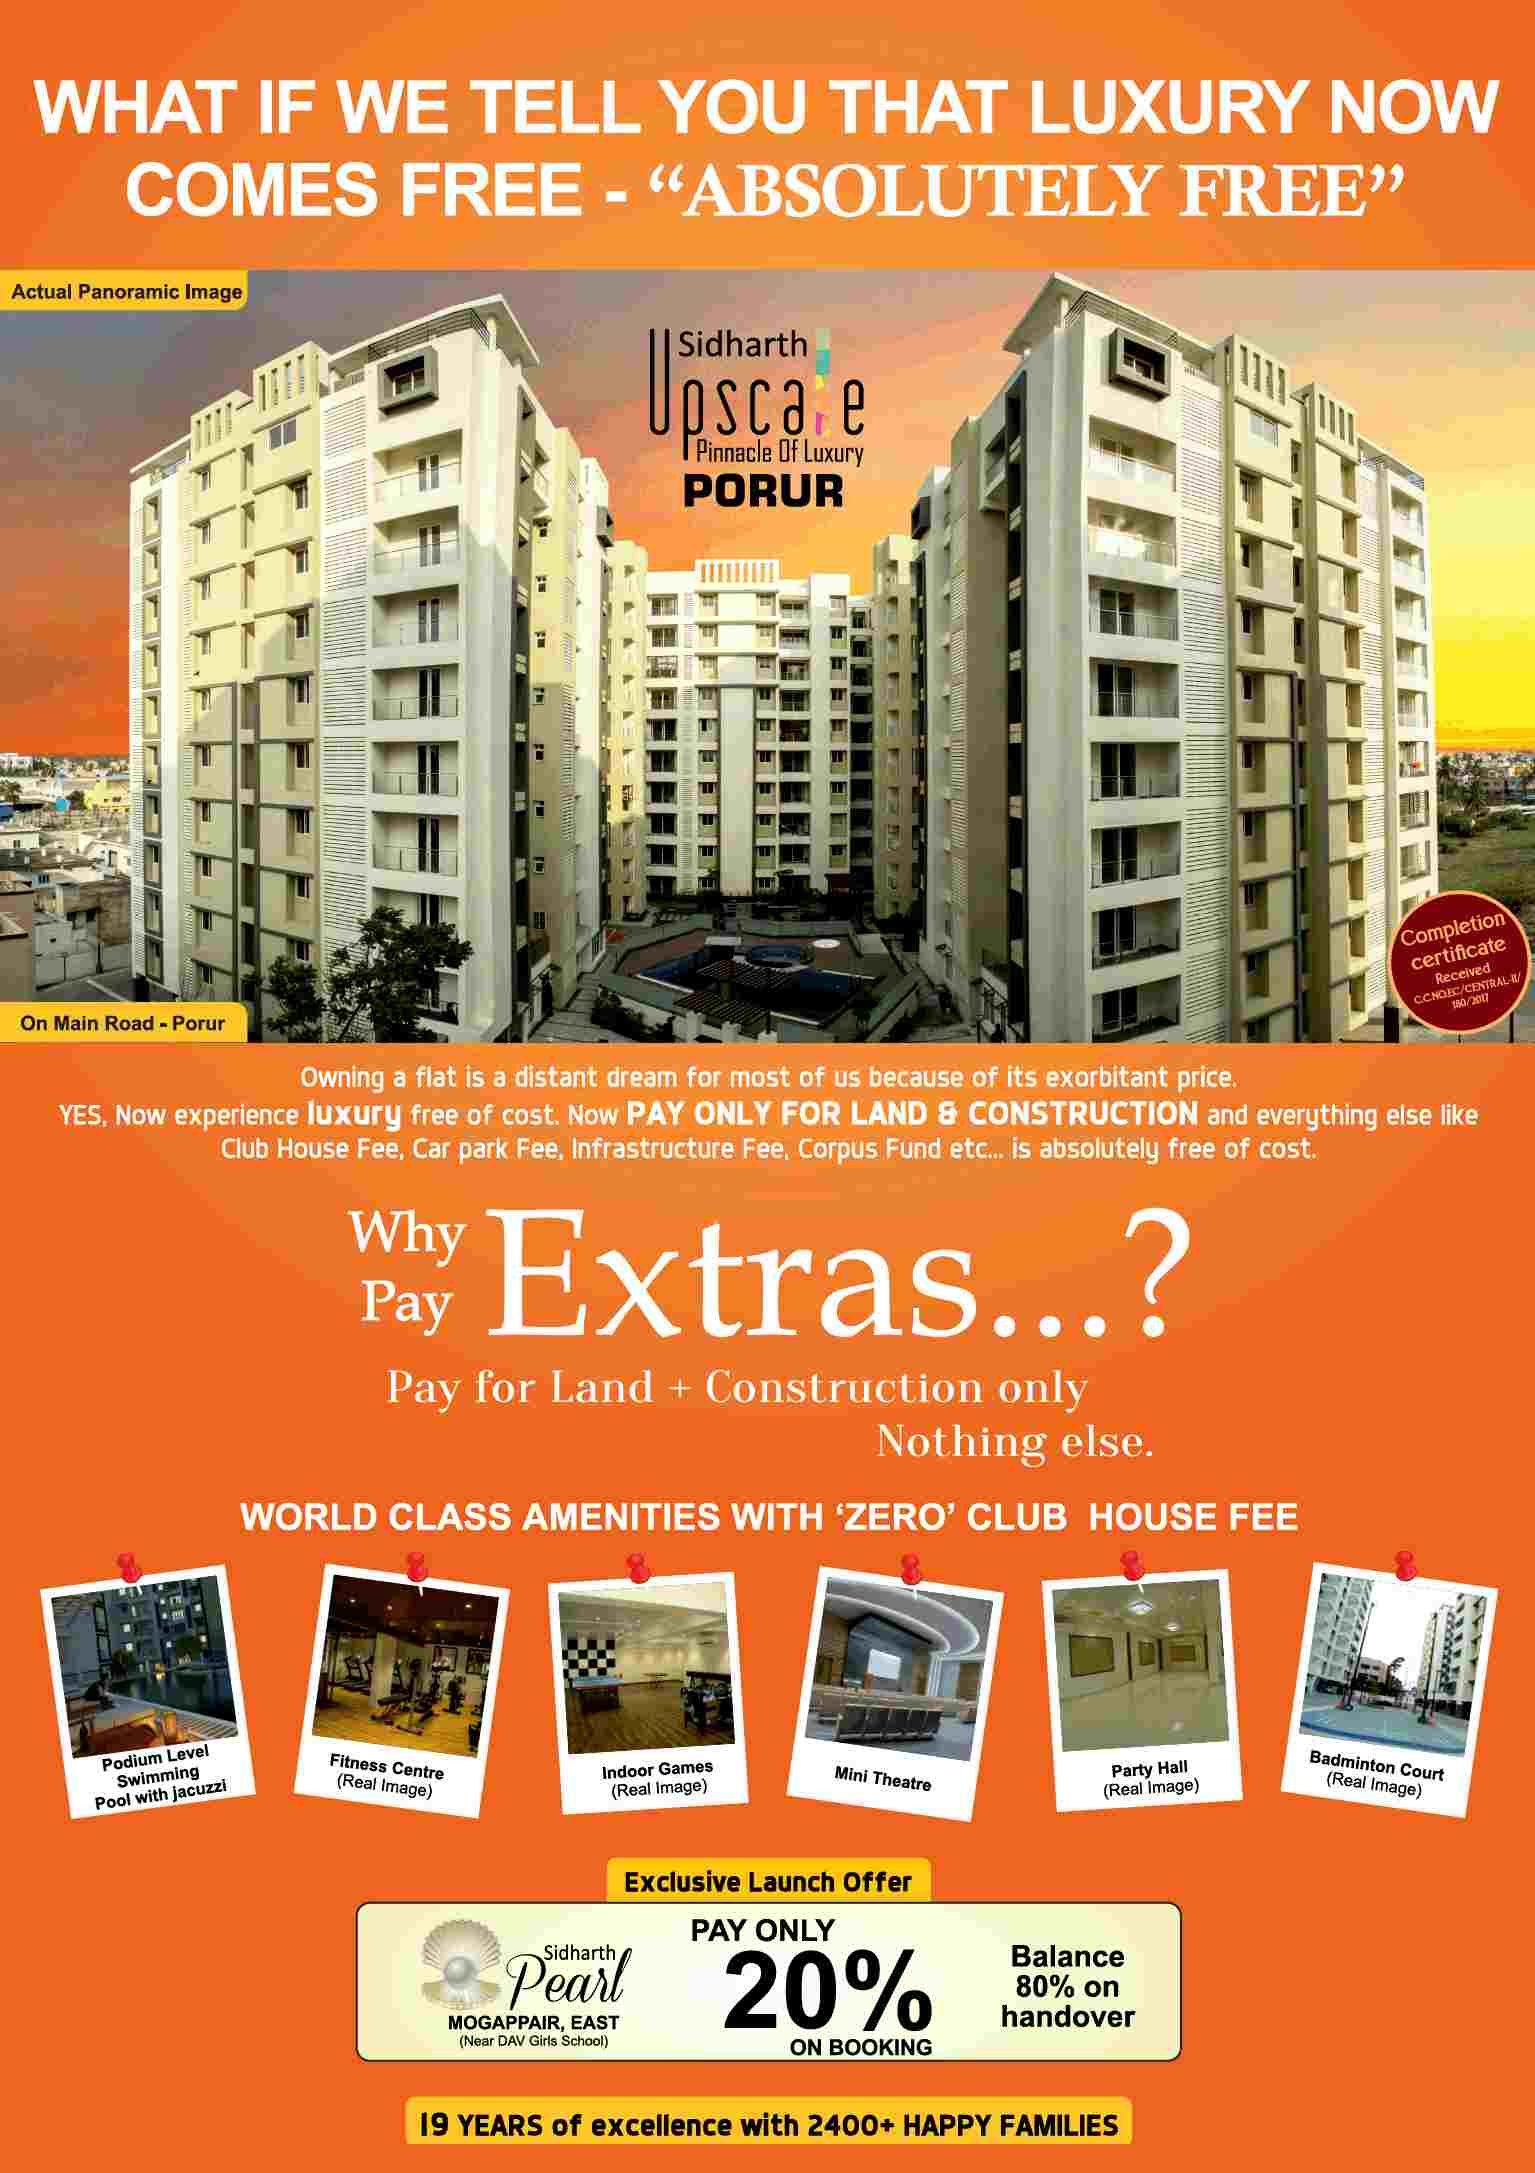 Pay only for land & construction and nothing else at Sidharth Upscale in Chennai Update